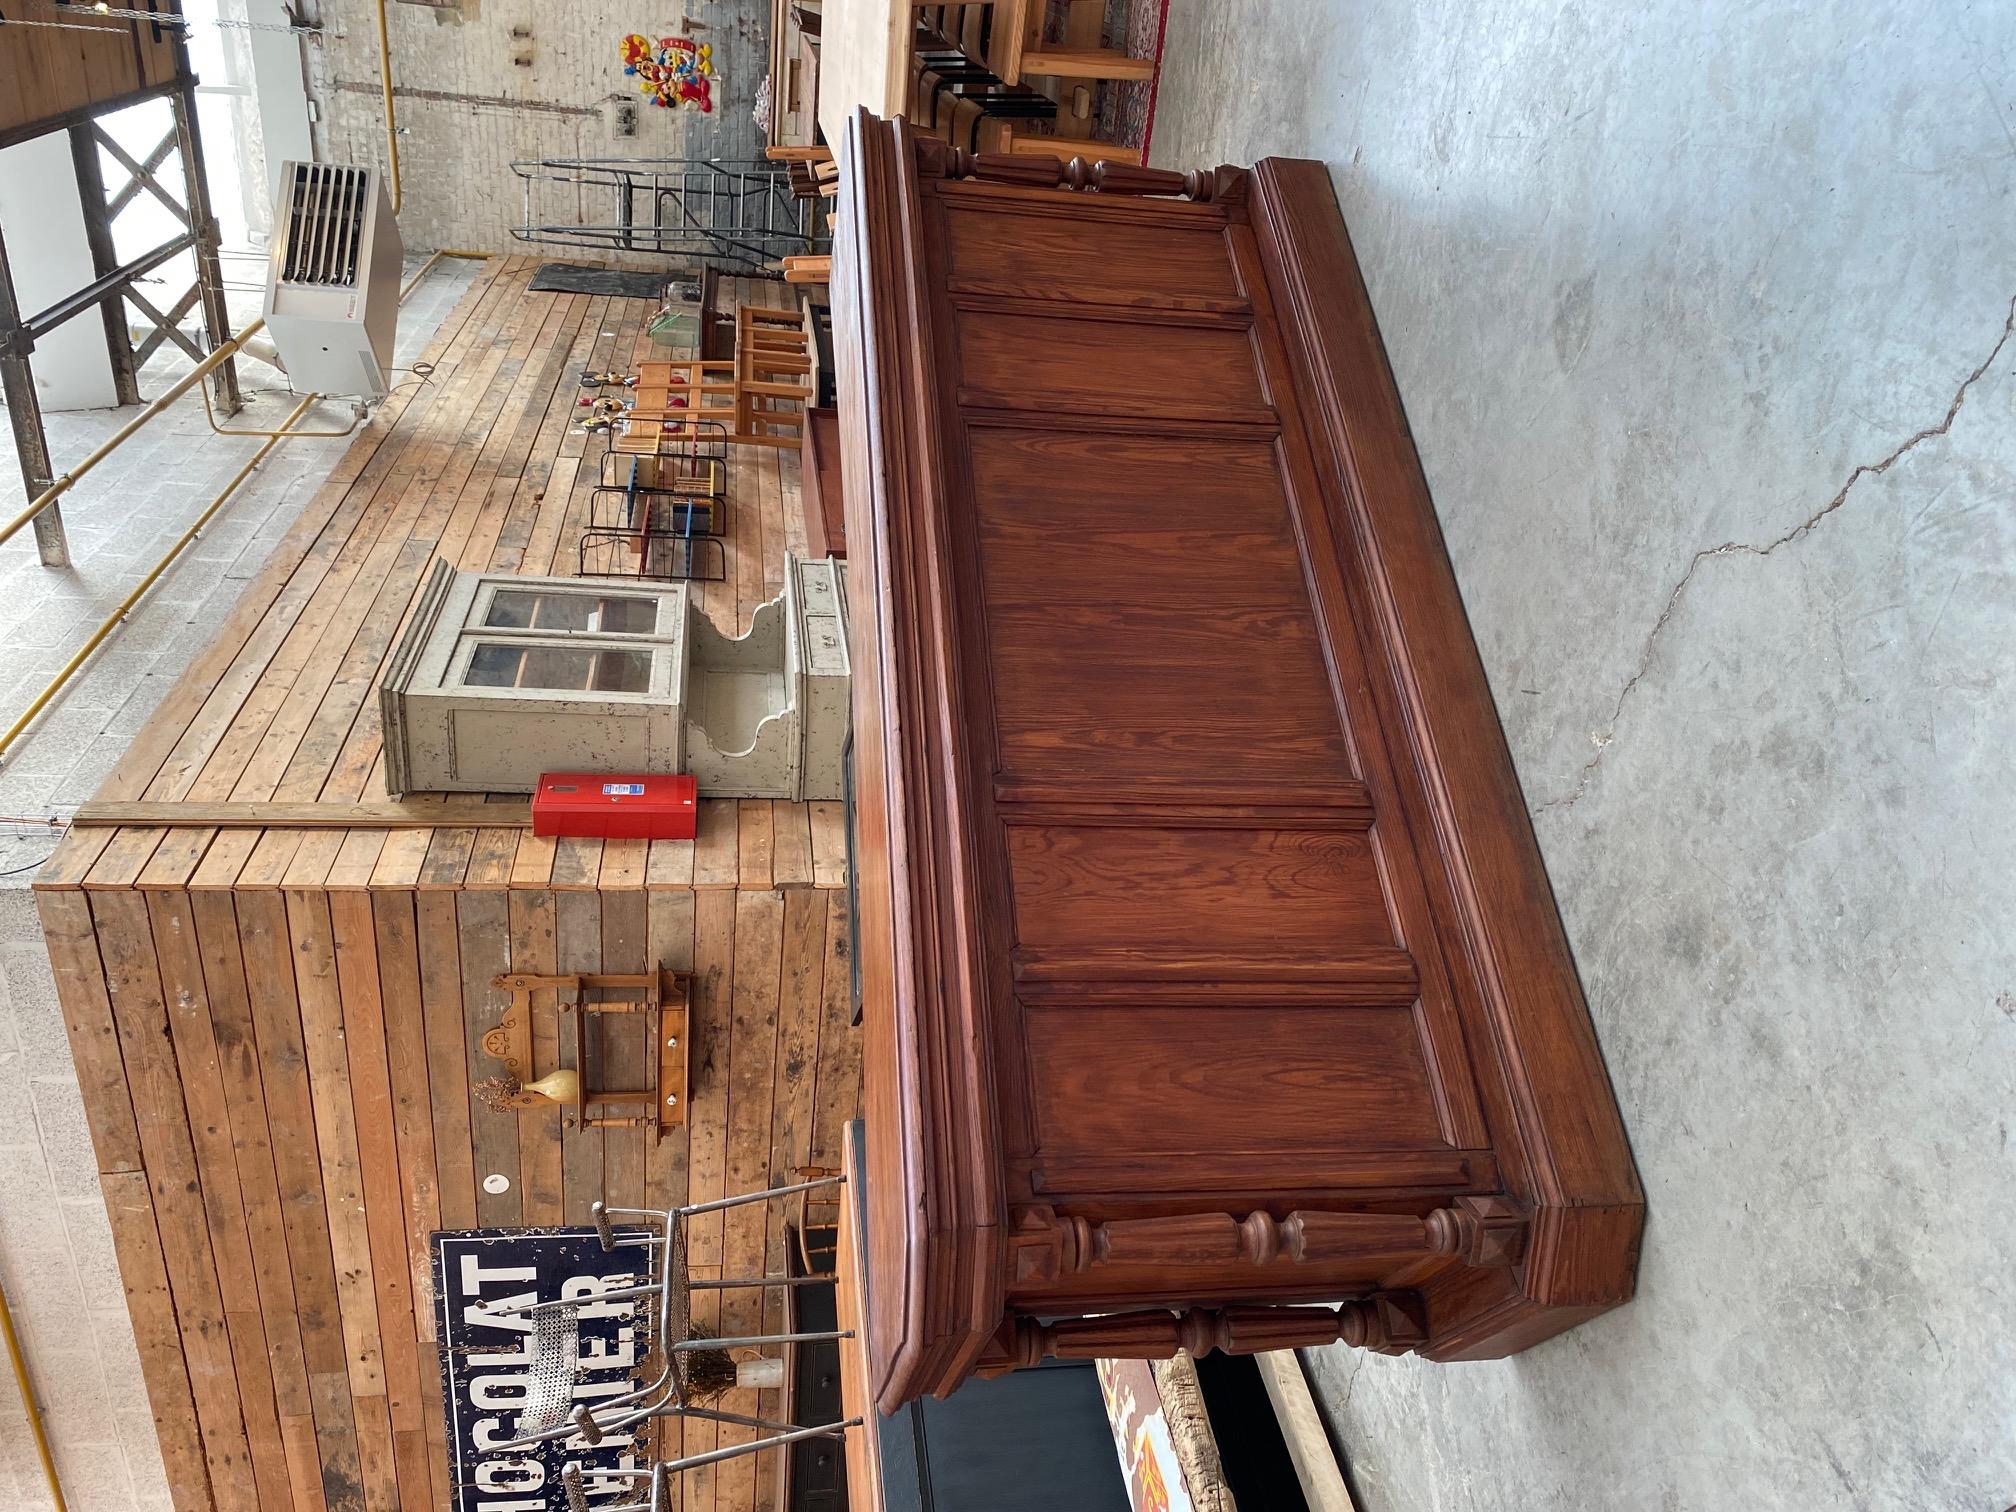 This counter has been completely restored.

It has a large storage shelf on the back.